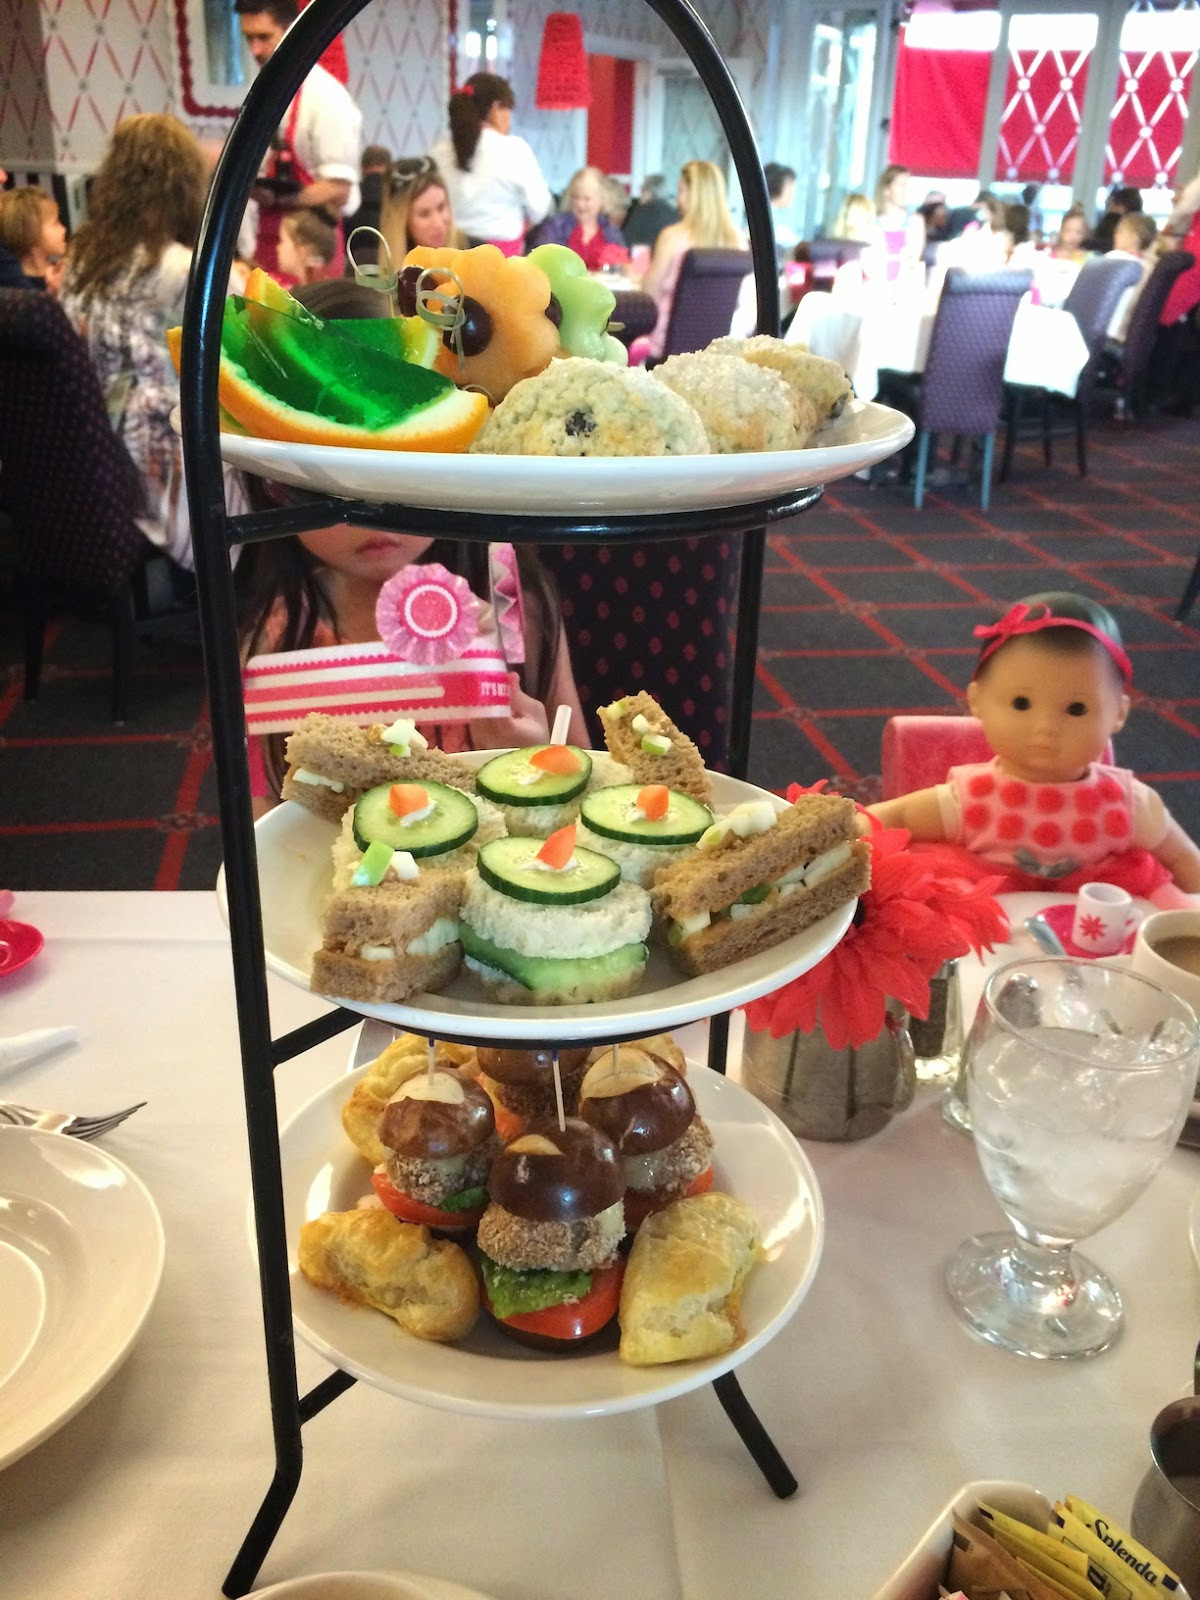 American Girl Tea Party Food Ideas
 American Girl Afternoon Tea Experience Bonding Time with